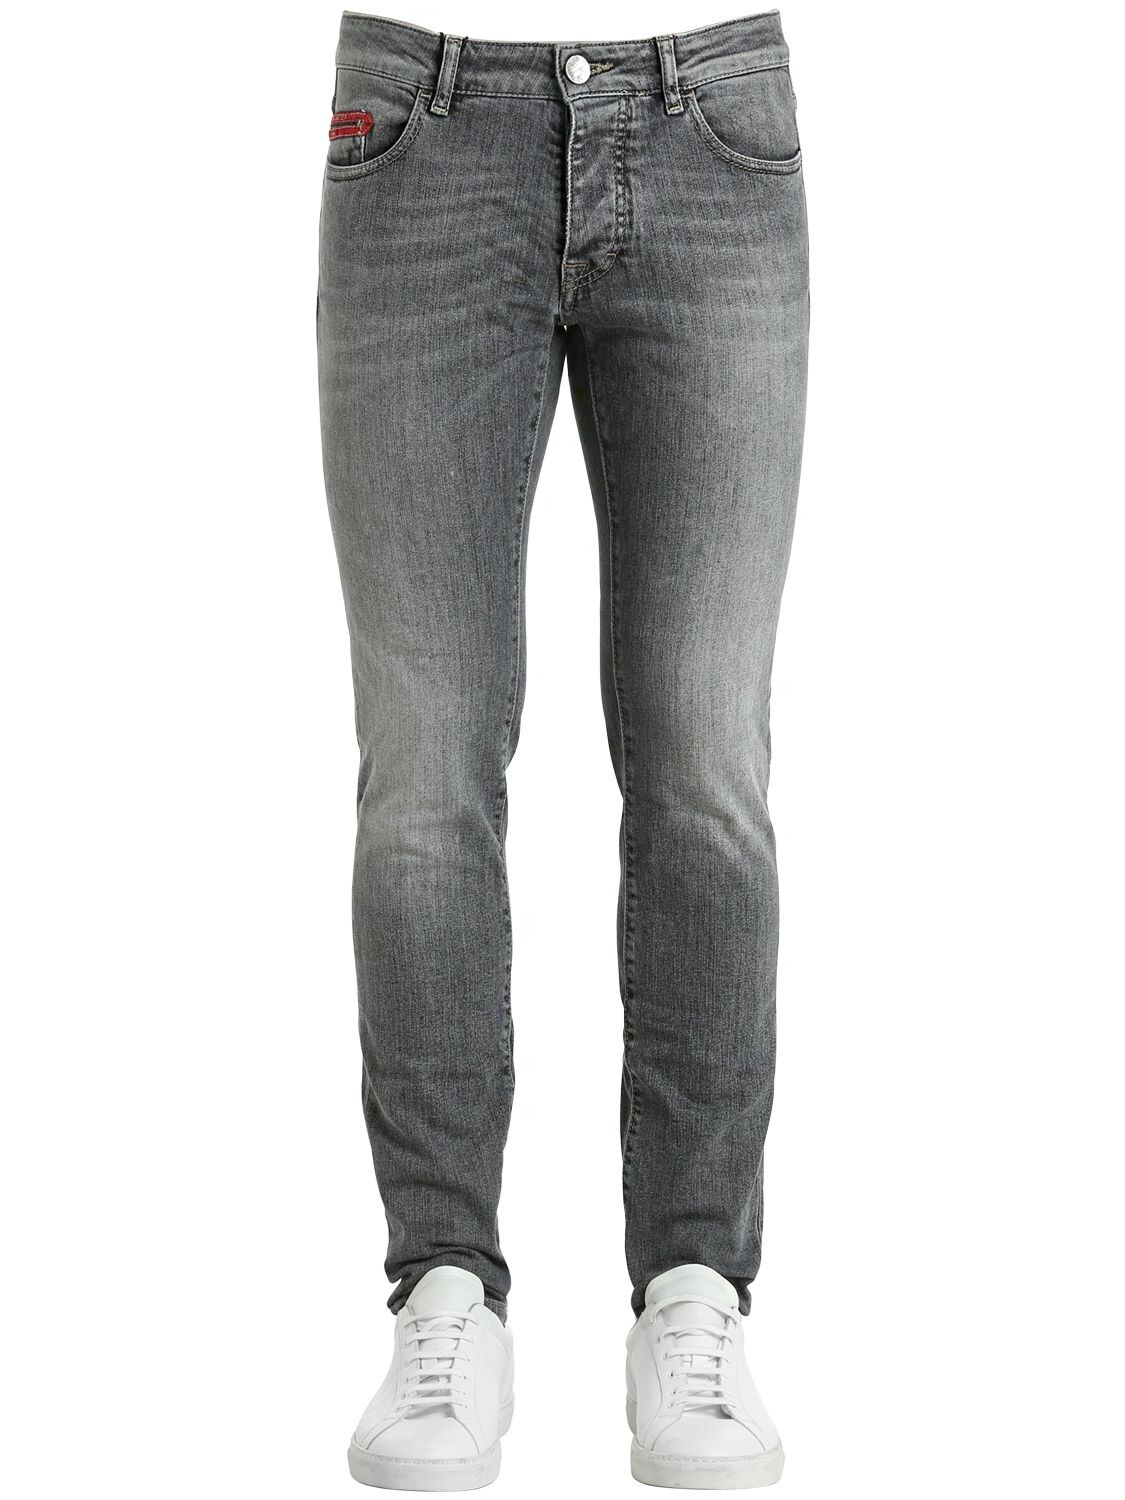 Unlimited 17cm Stone Washed Denim Jeans In Grey